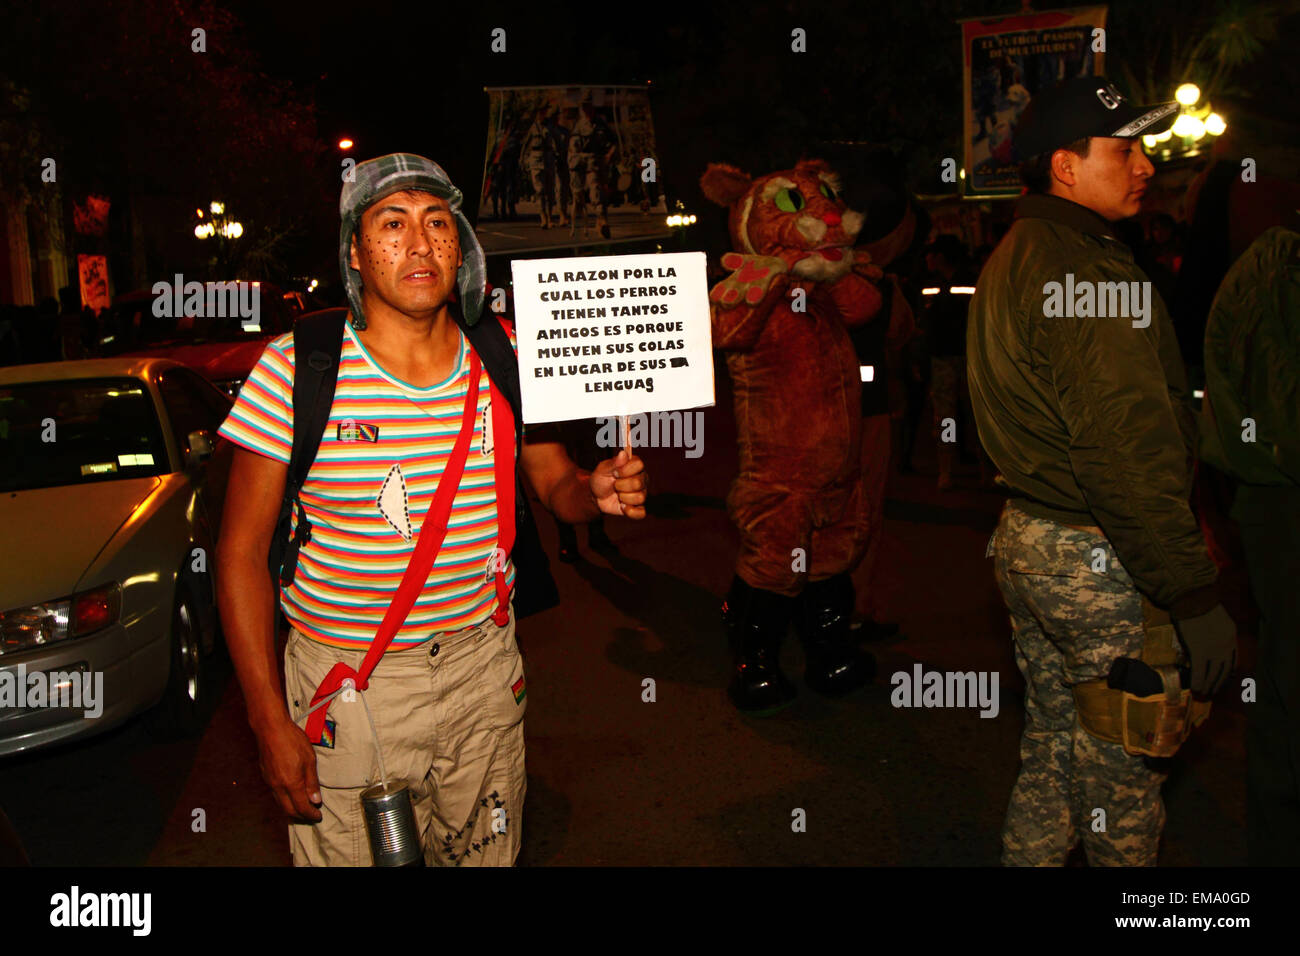 La Paz, Bolivia, 17th April 2015. A man dressed up as the famous Mexican TV character El Chavo from the sitcom El Chavo del Ocho takes part in a march to demand the government passes laws to protect animals from abuse, and to increase punishments for those found guilty of cruelty towards animals. Credit:  James Brunker / Alamy Live News Stock Photo